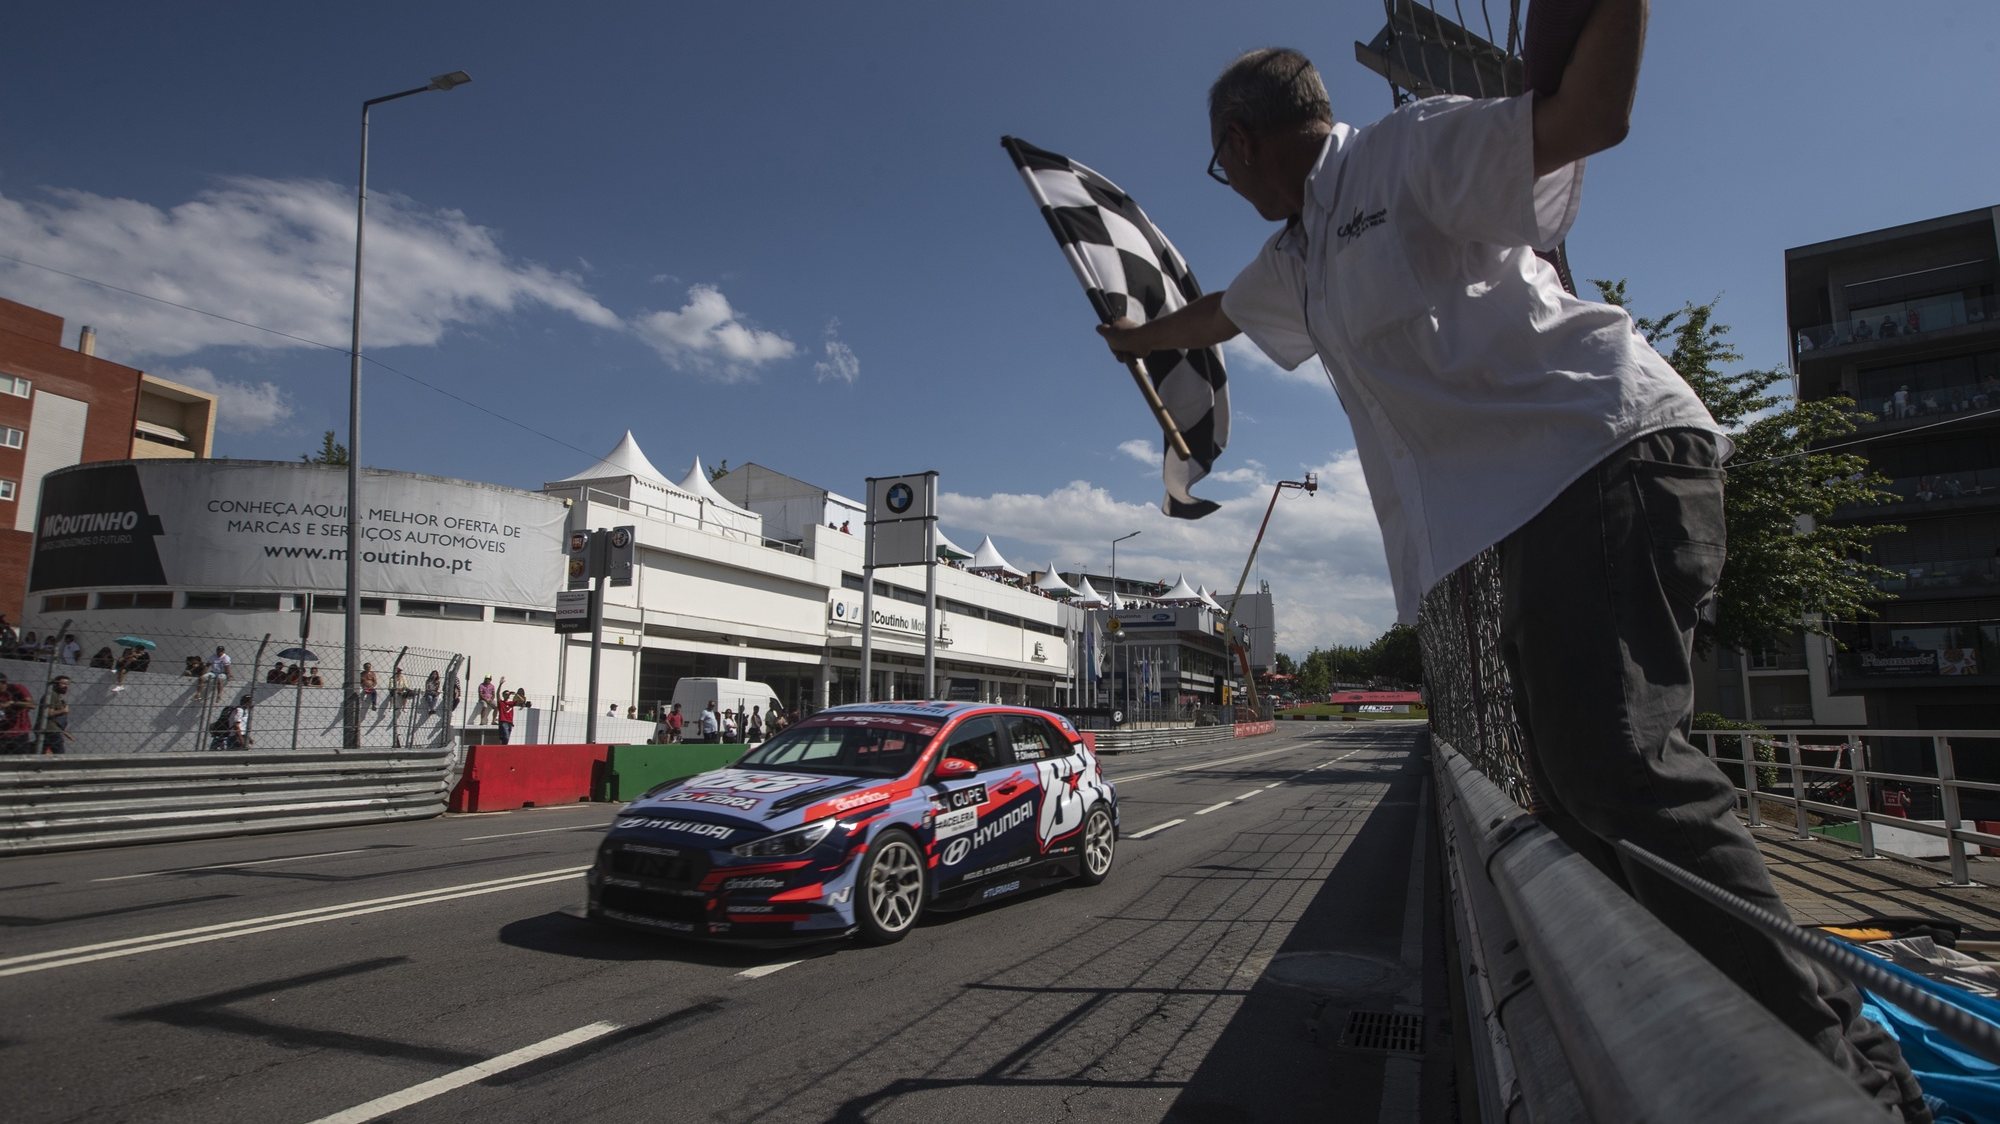 Portuguese motorcycling driver Miguel Oliveira in his Hyundai I30 crosses the finish line in thir during the WTCR Race of Portugal 2022, in Vila Real, north of Portugal, 3 July 2022. JOSE COELHO/LUSA